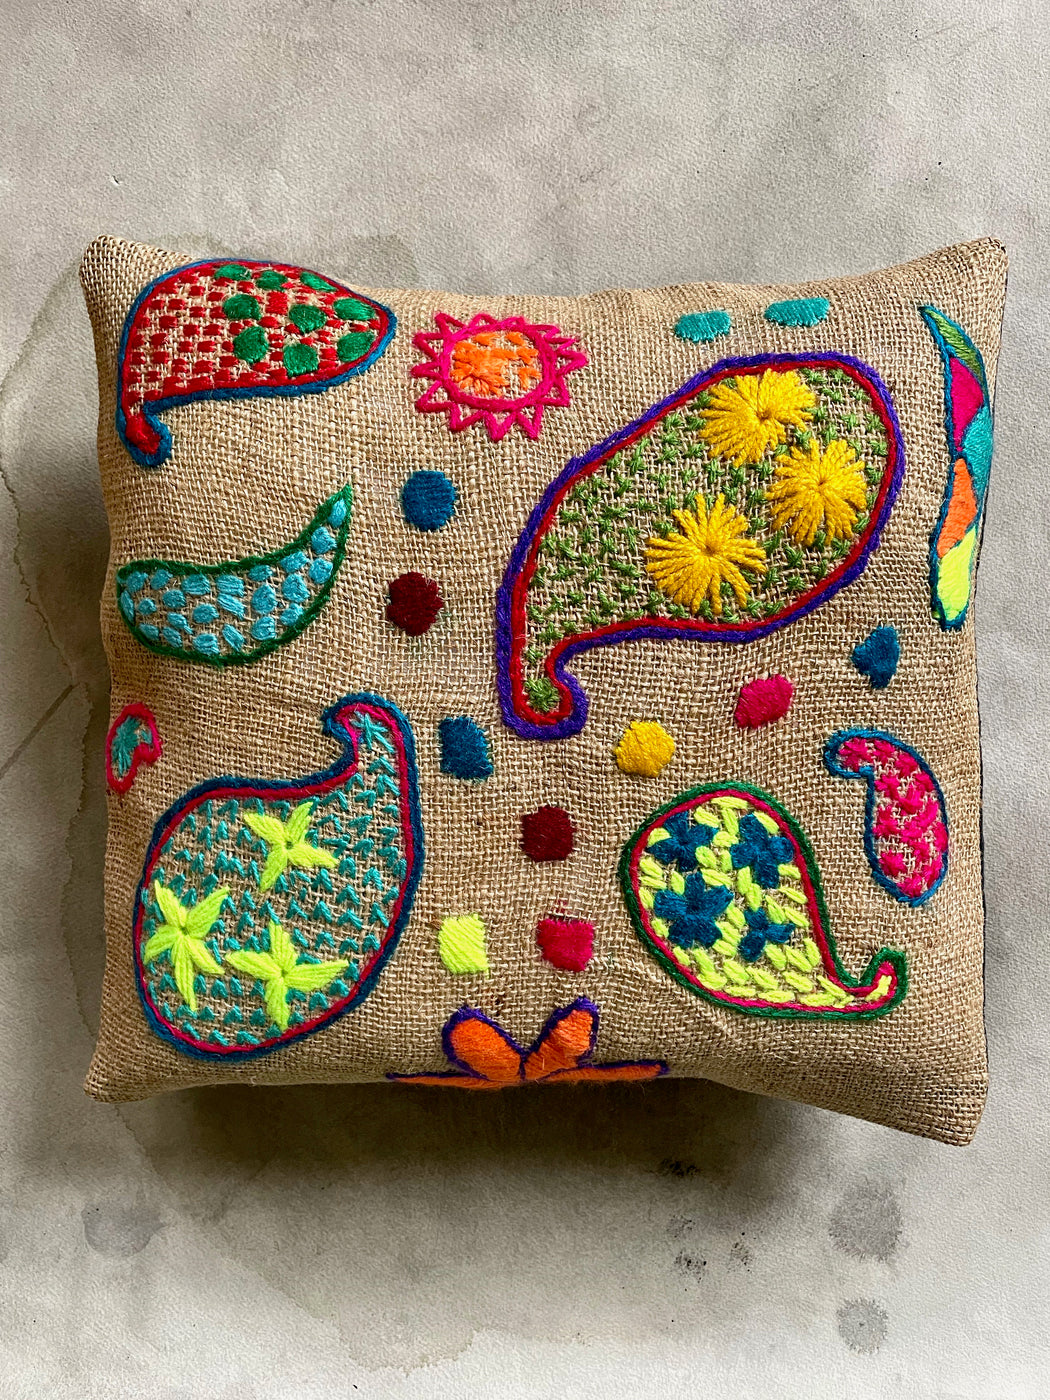 "Paisley" Hand-Embroidered Pillow by Nathalie Lete